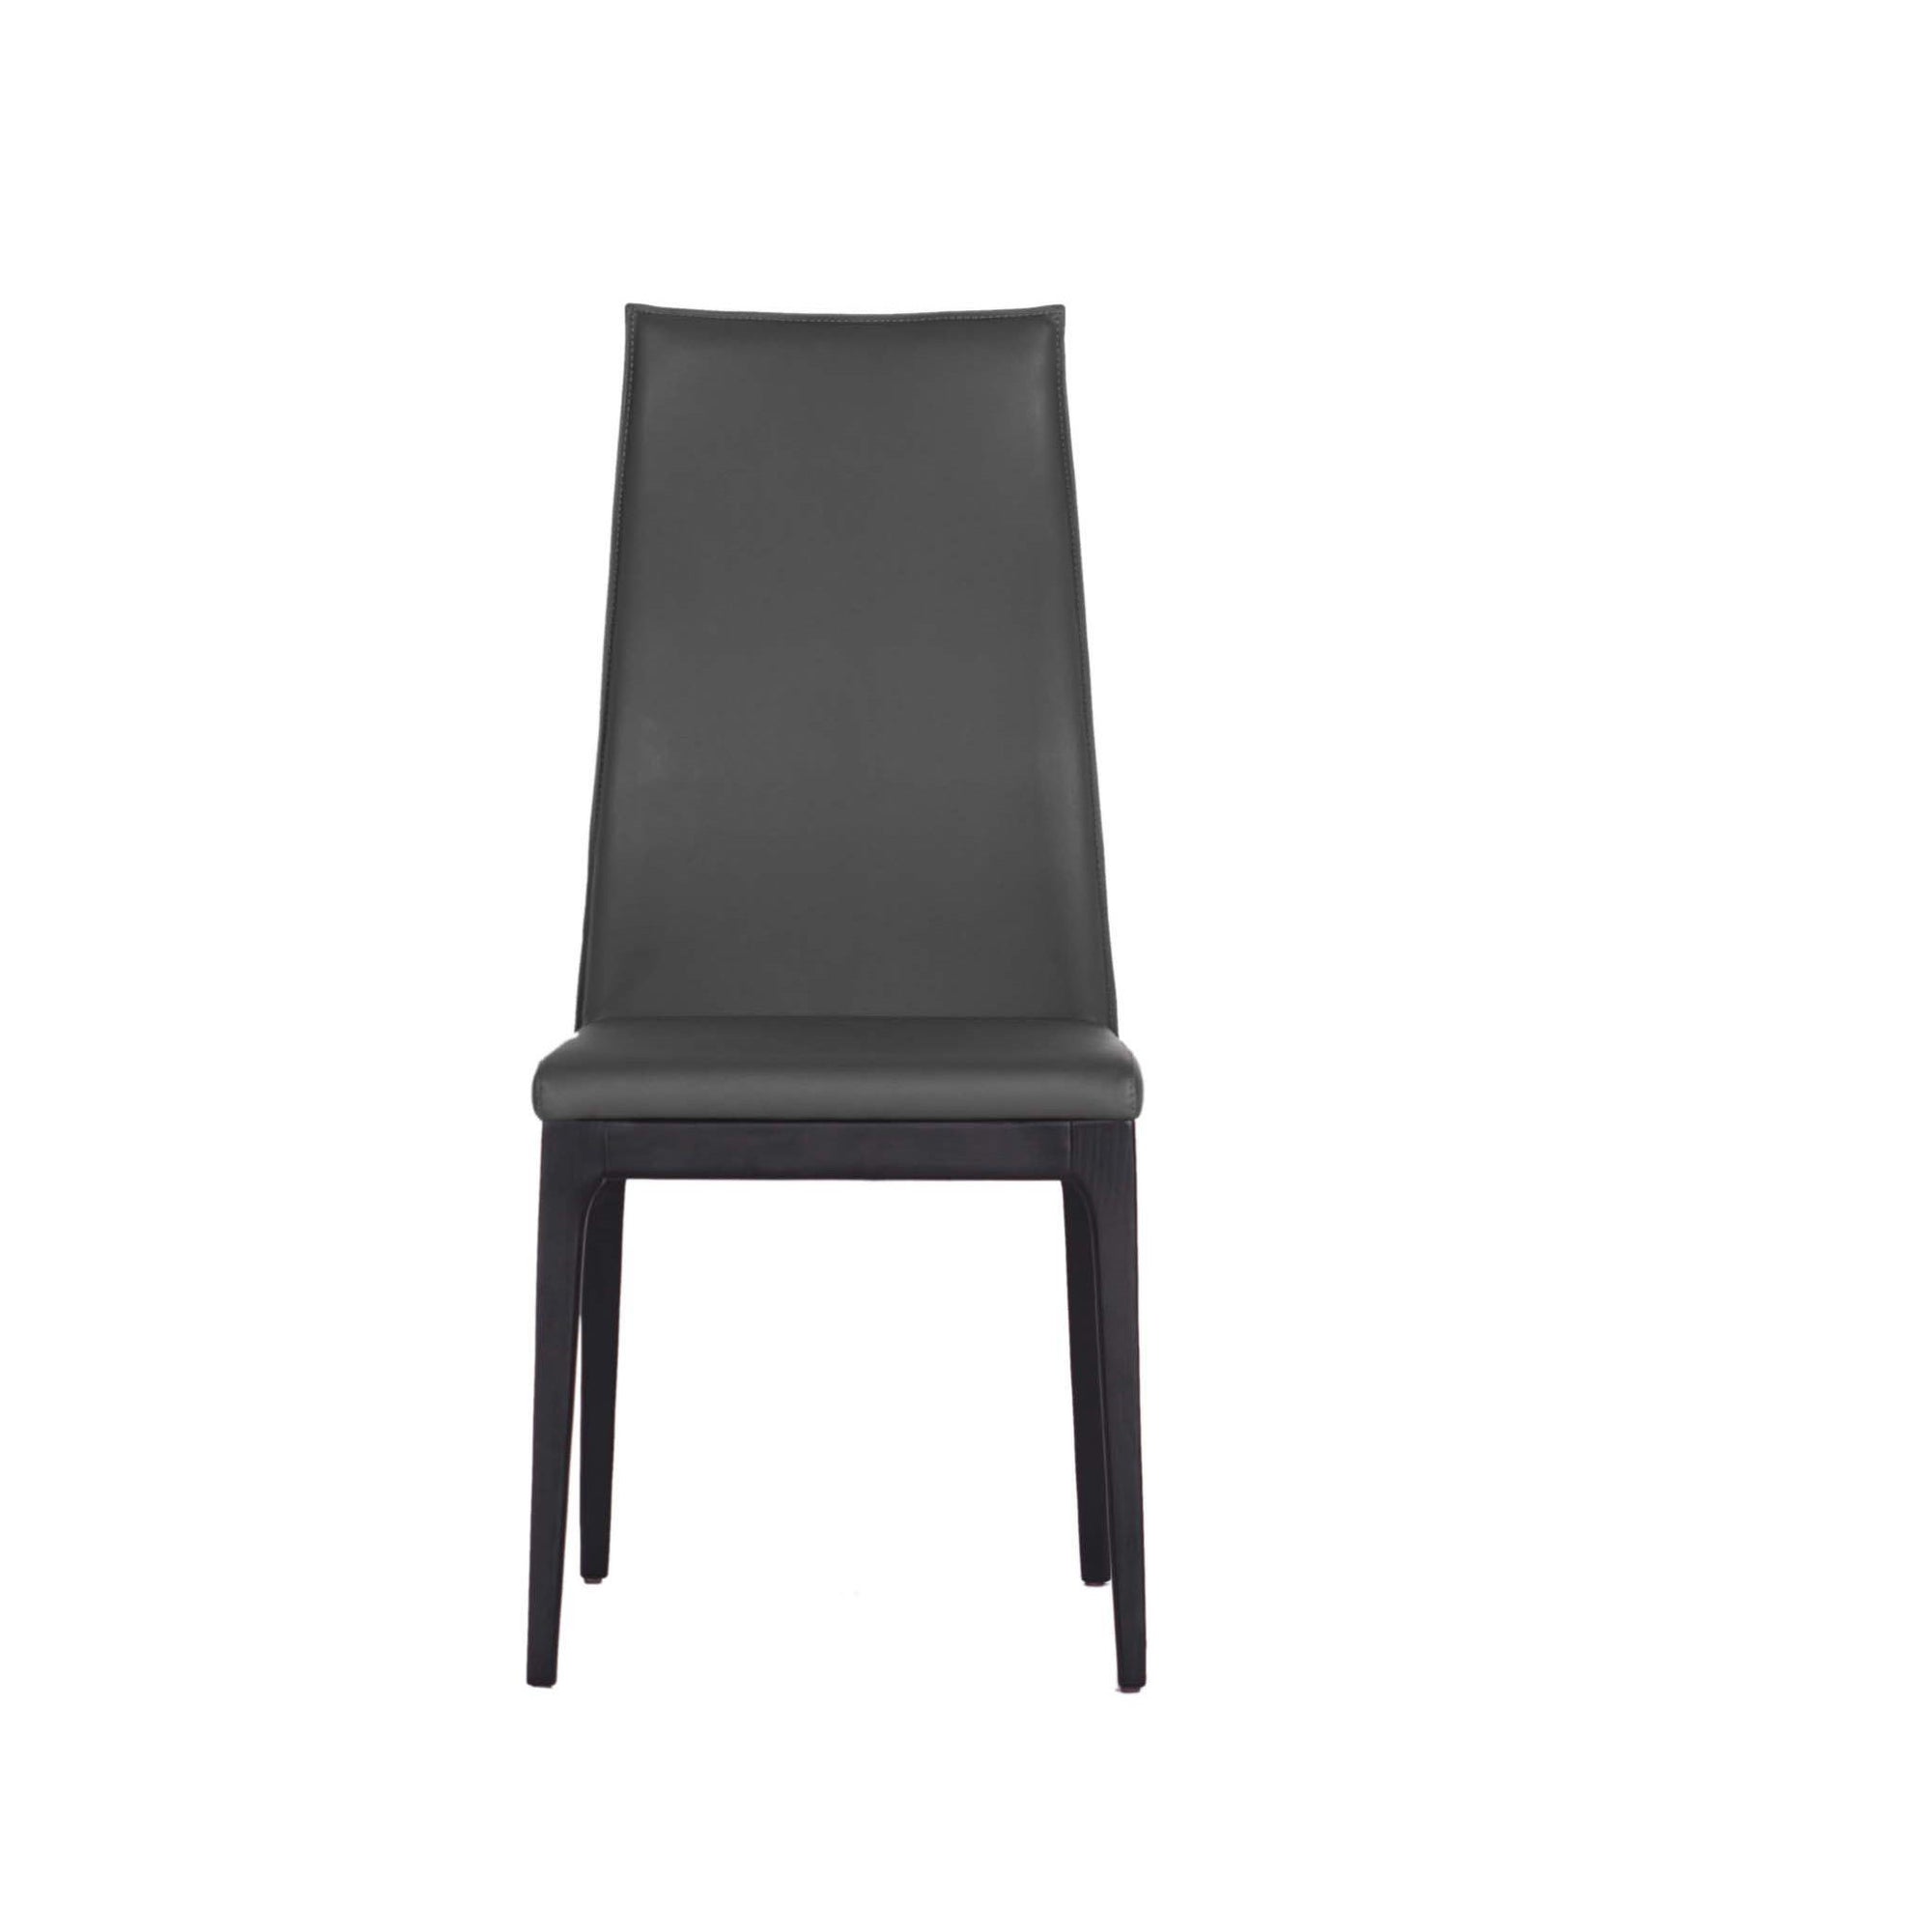 Bellini-Viola Dining Chair-Dining Chairs-MODTEMPO